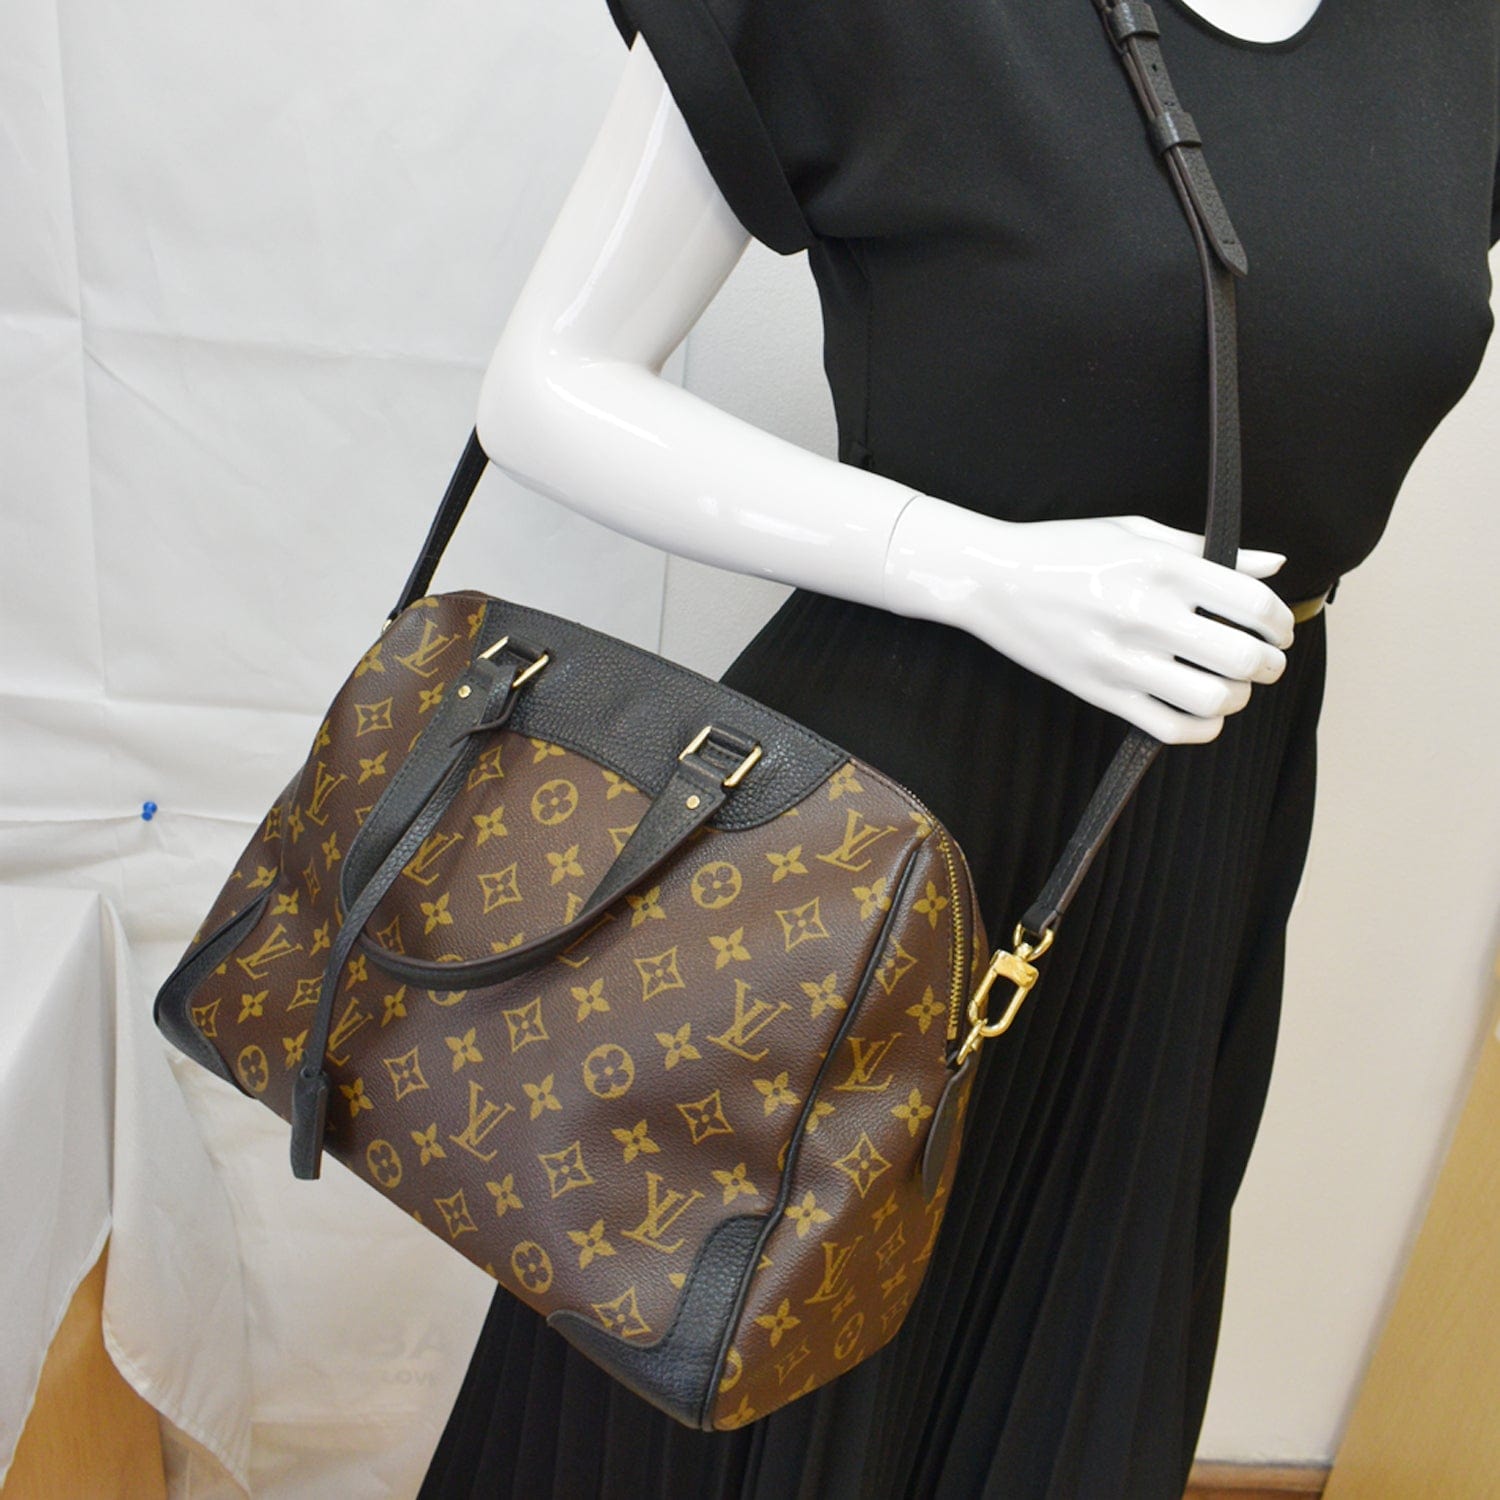 Louis Vuitton Neverfull Bags for sale in Buffalo, New York